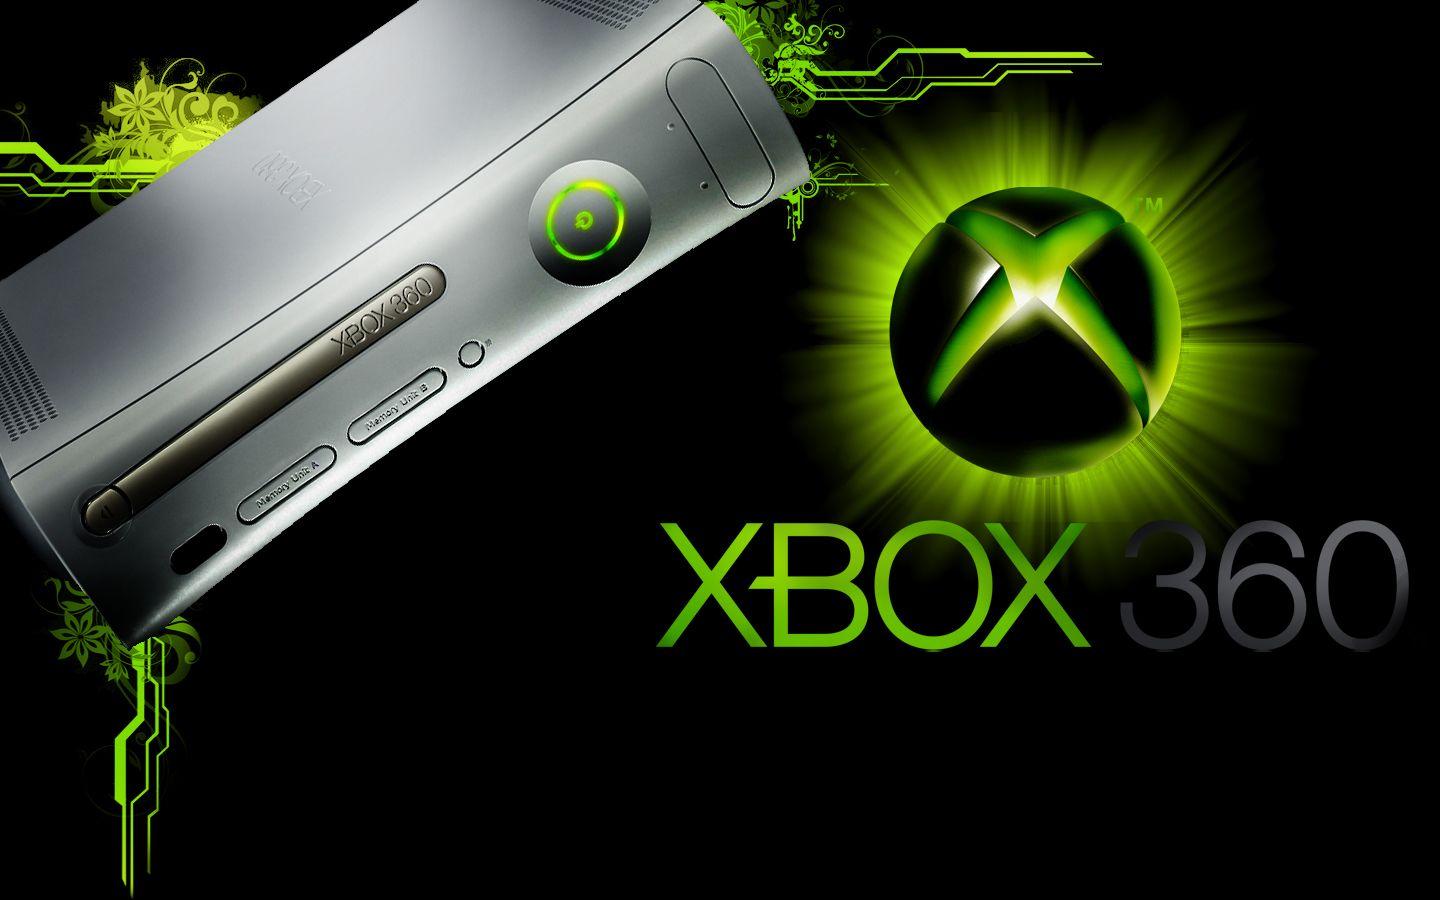 Xbox 360 Wallpaper Themes Free, Gallery of 43 Xbox 360 Background